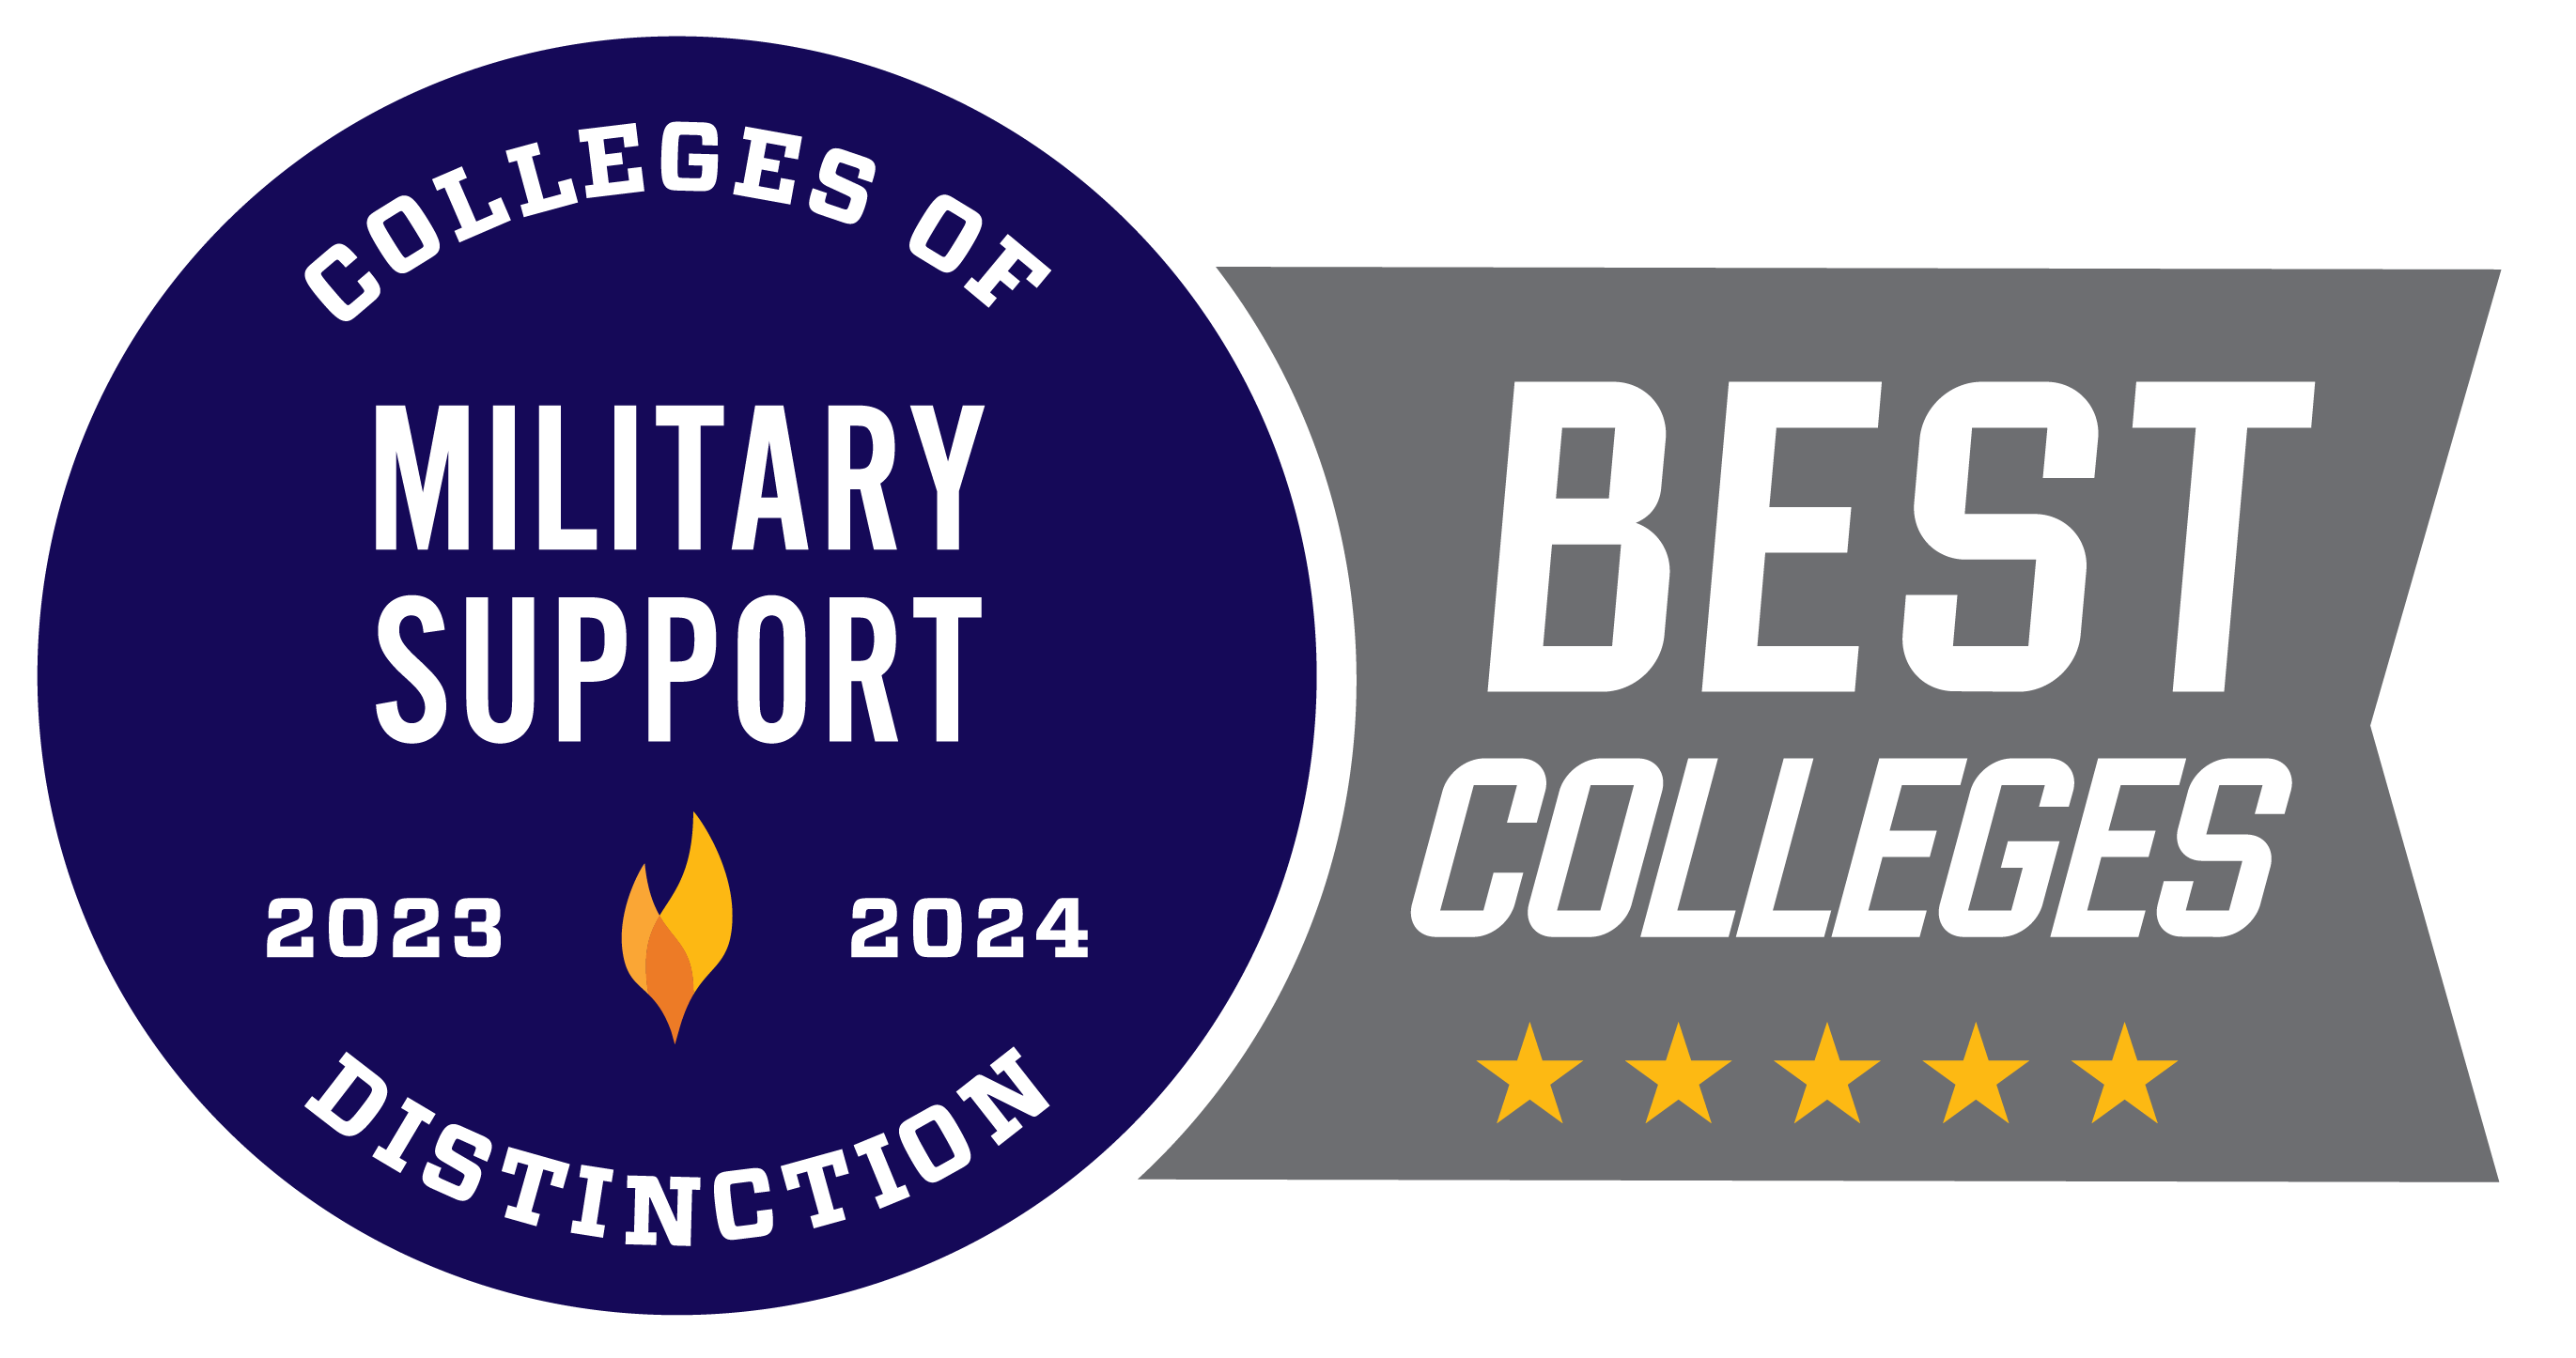 College of Distinction: 2022-2023 Military Support badge